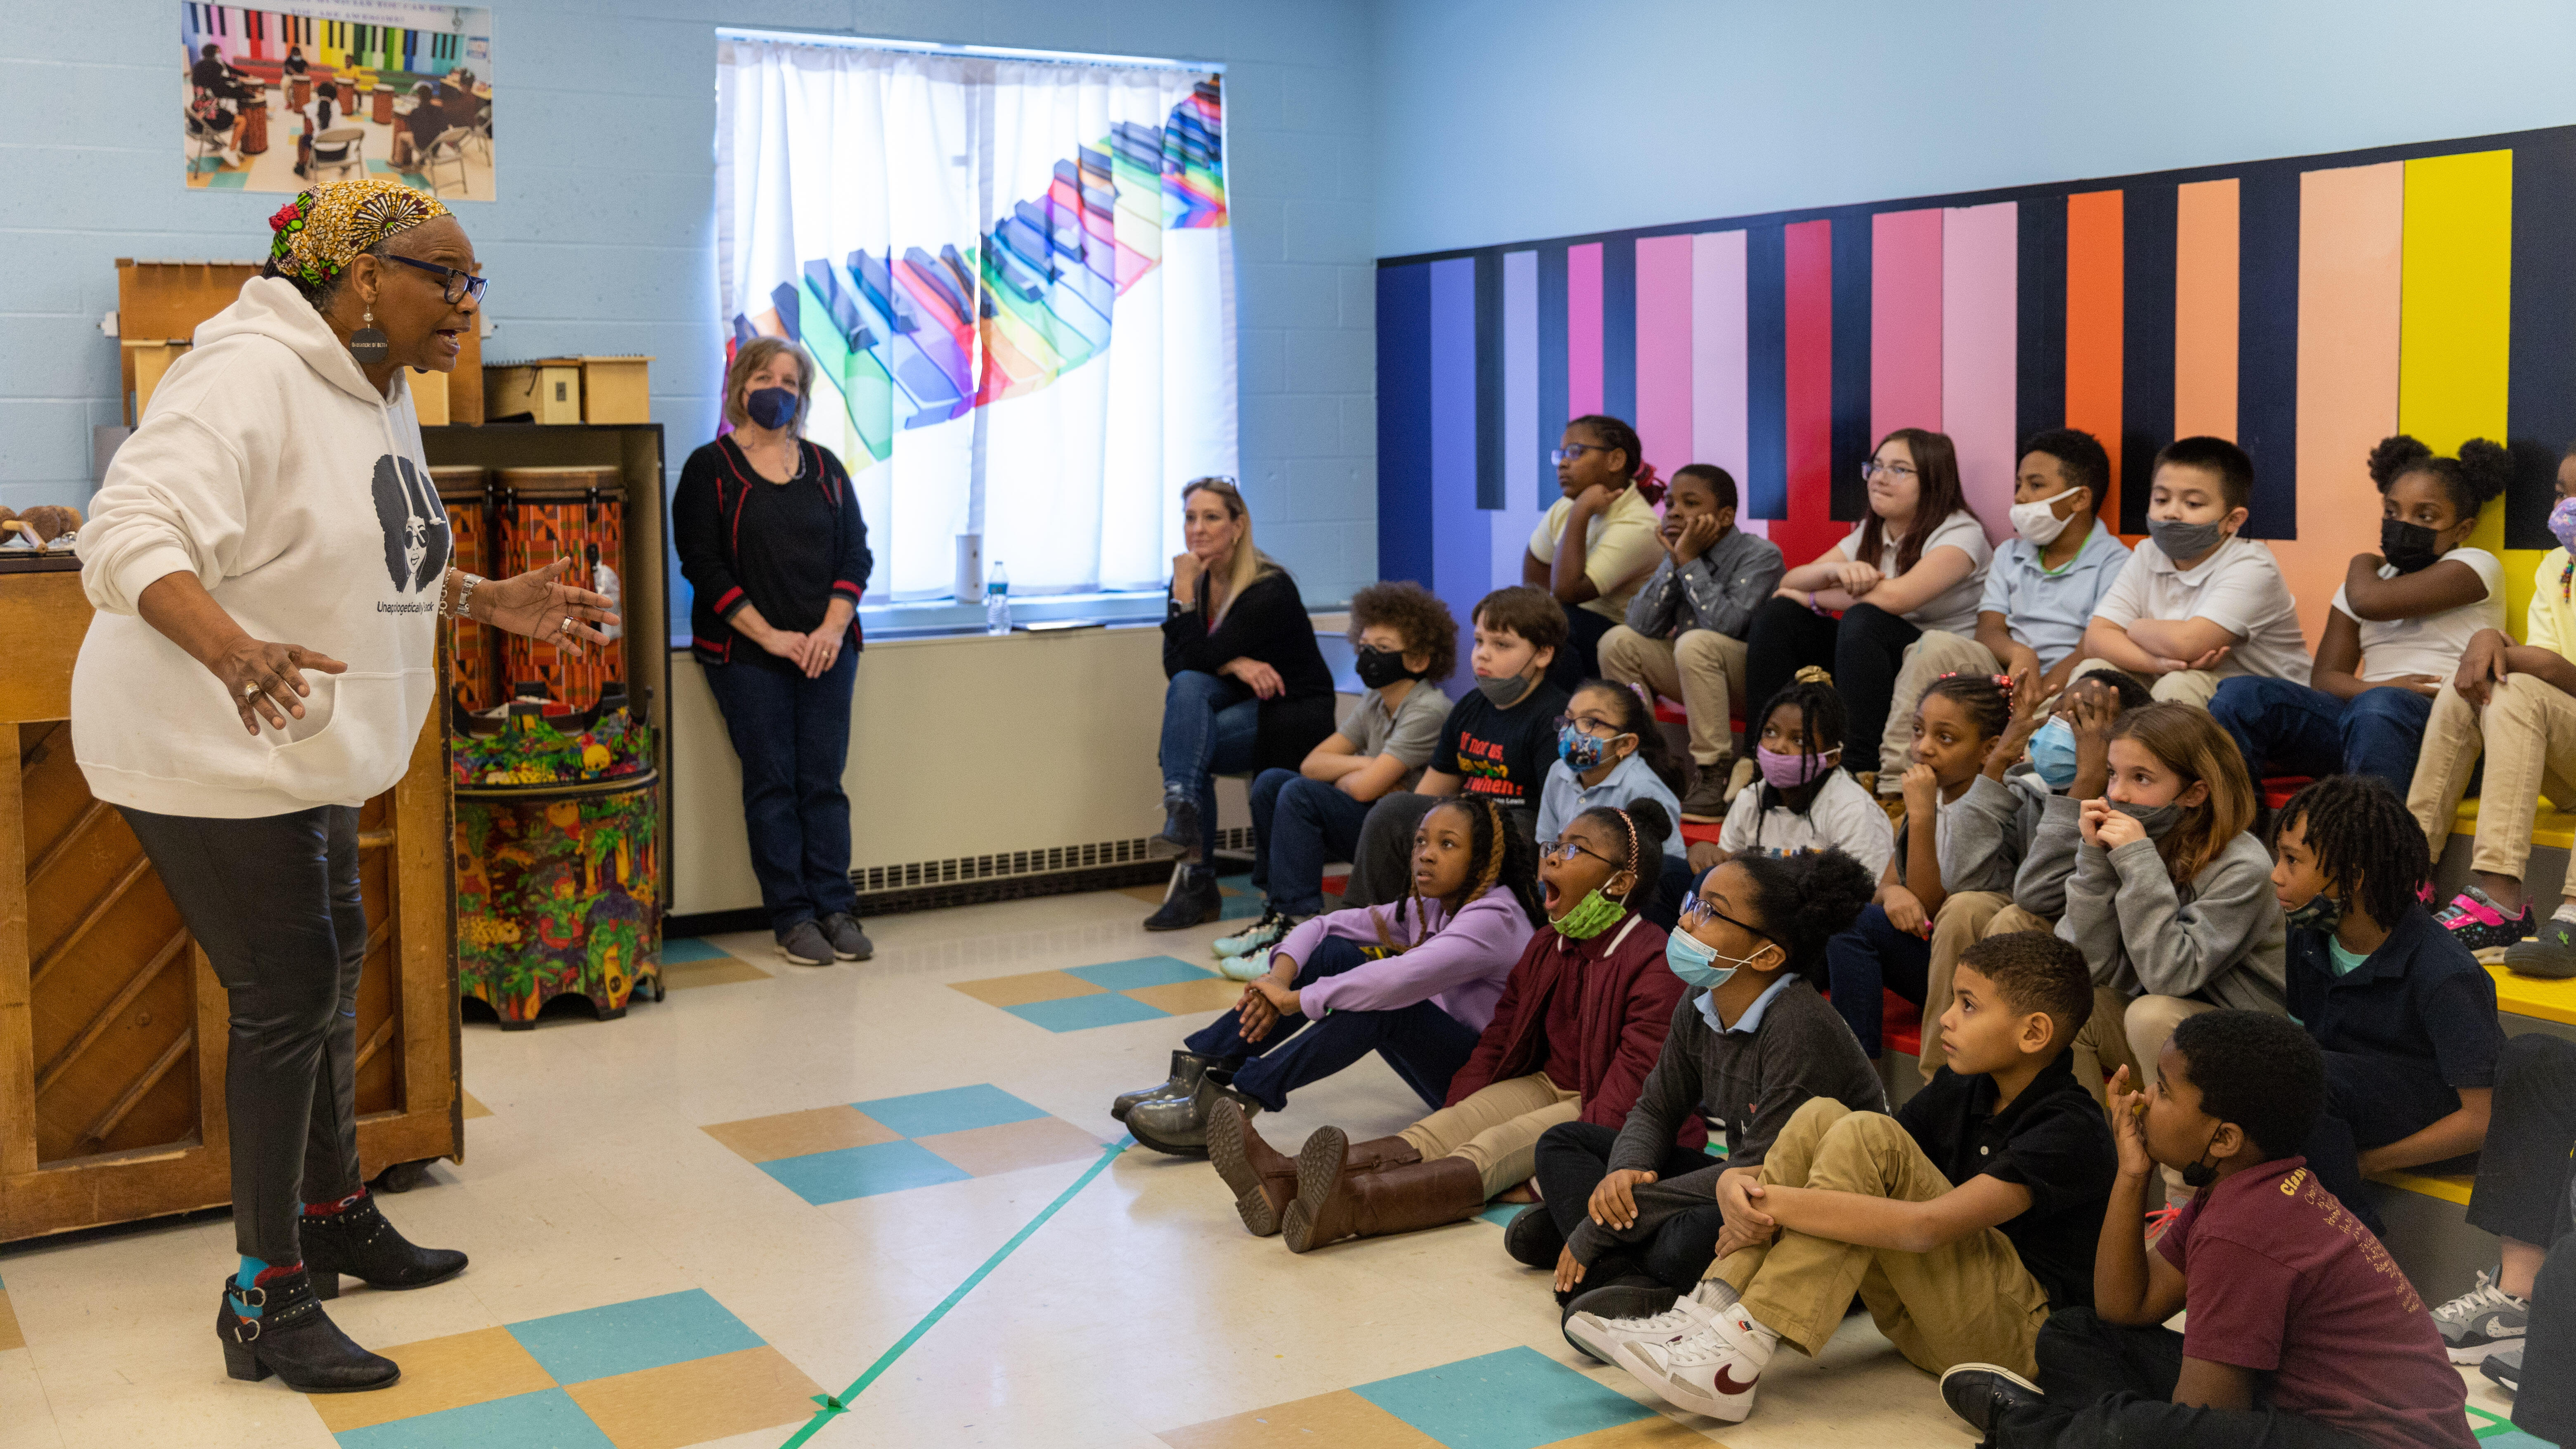 A presenter shares a story with a captivated audience during the Barrett Black History Month Interactive Living Museum